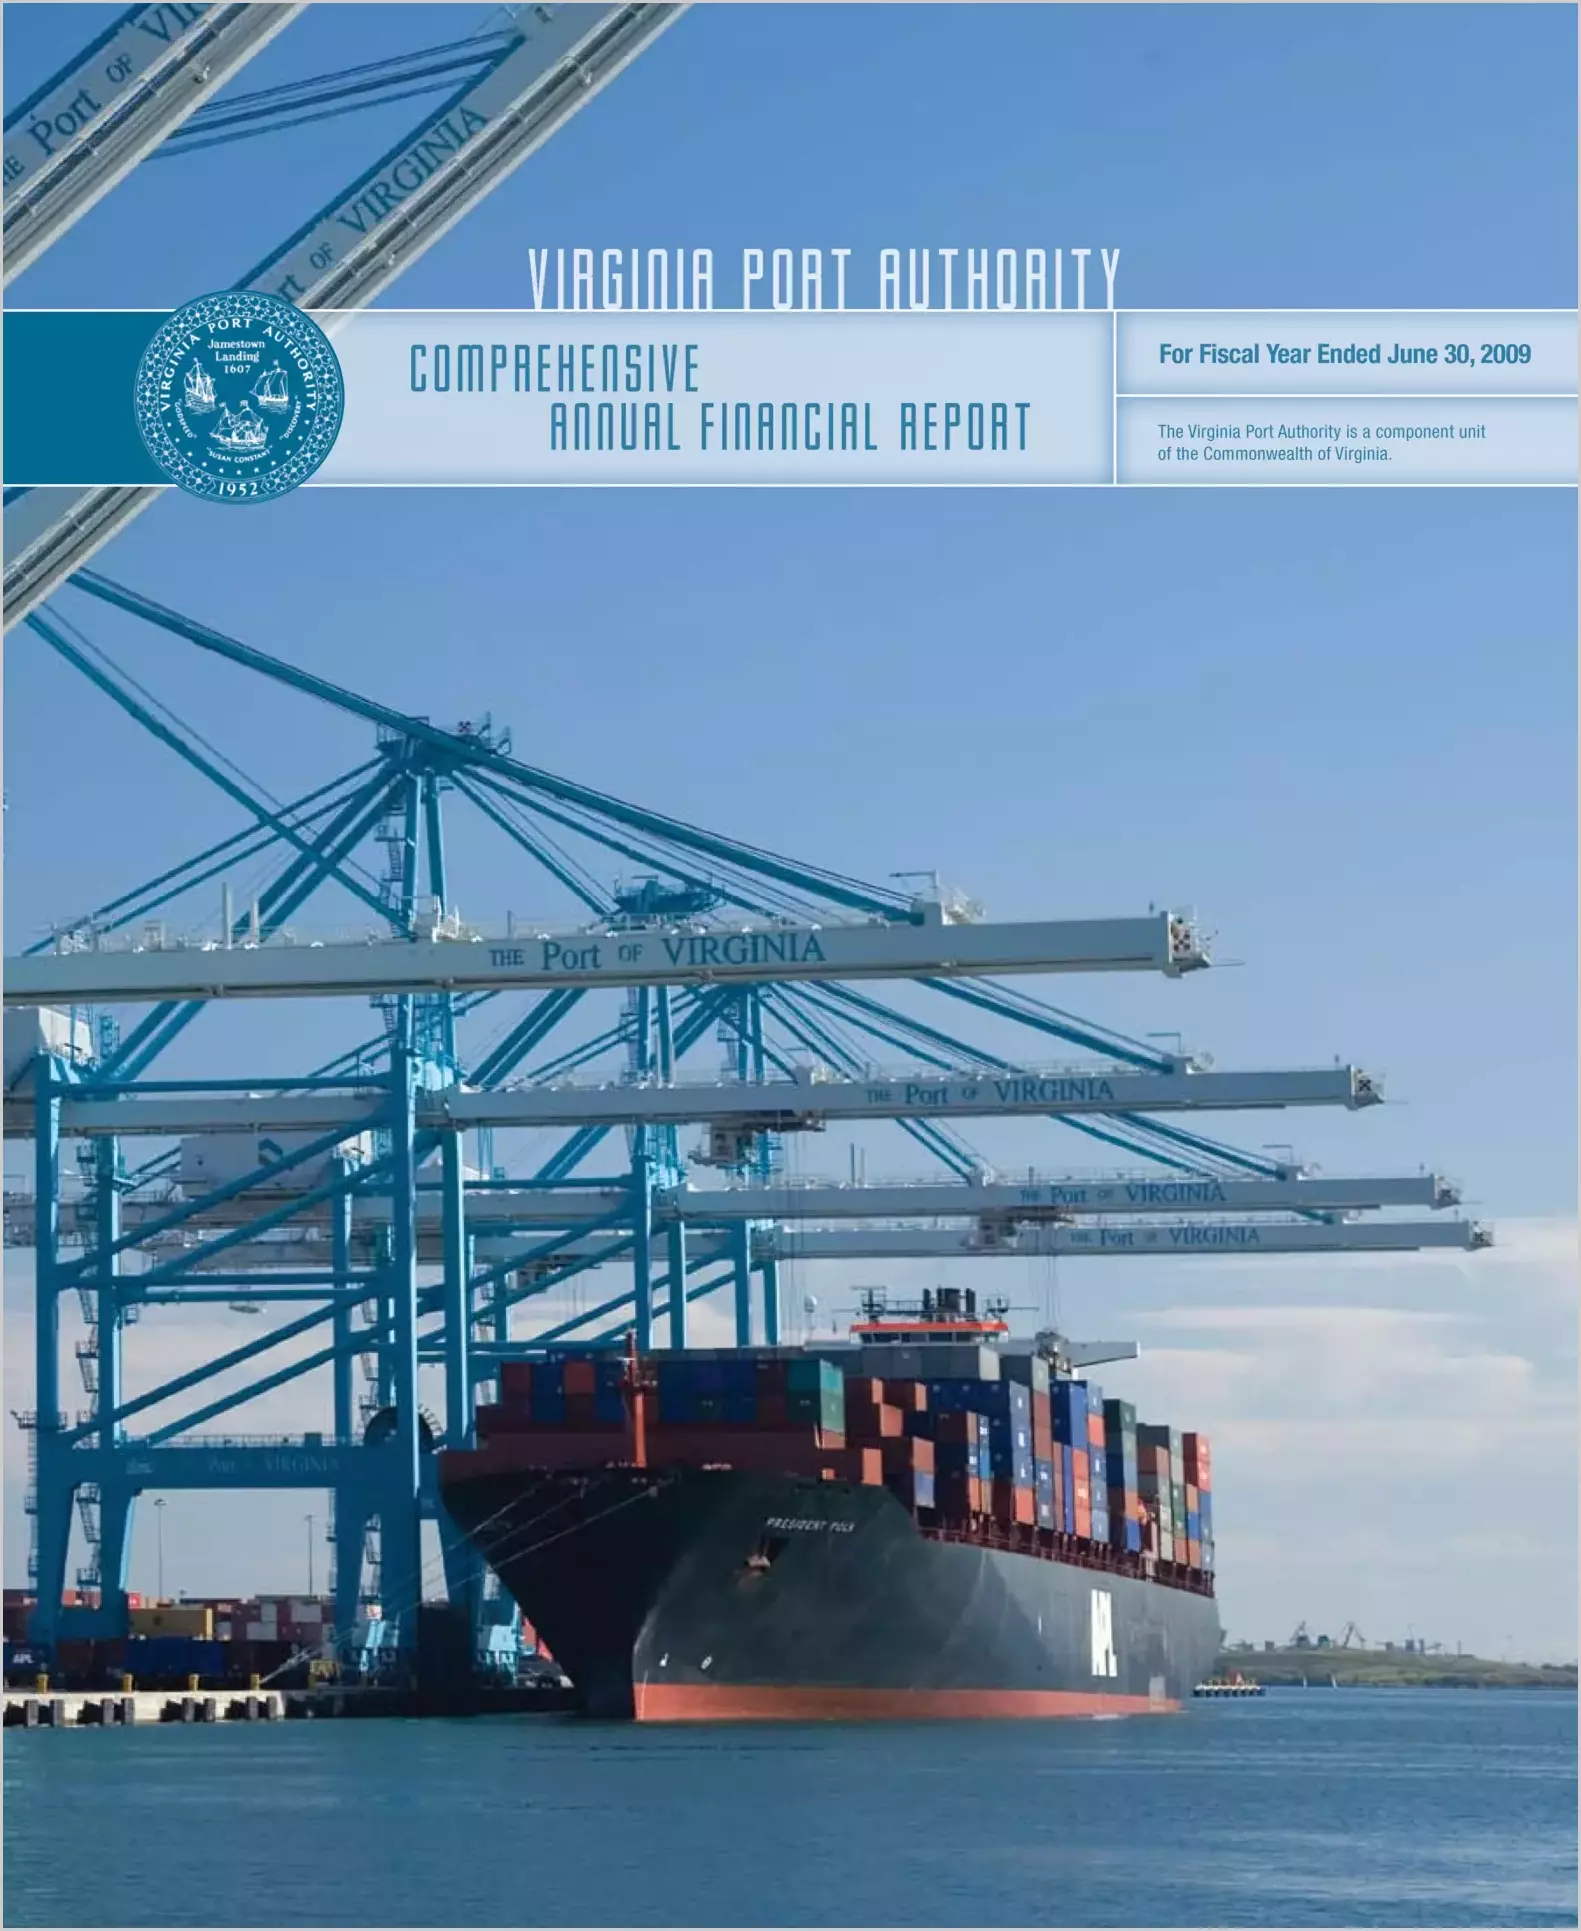 Virginia Port Authority Annual Financial Report for the year ended June 30, 2009